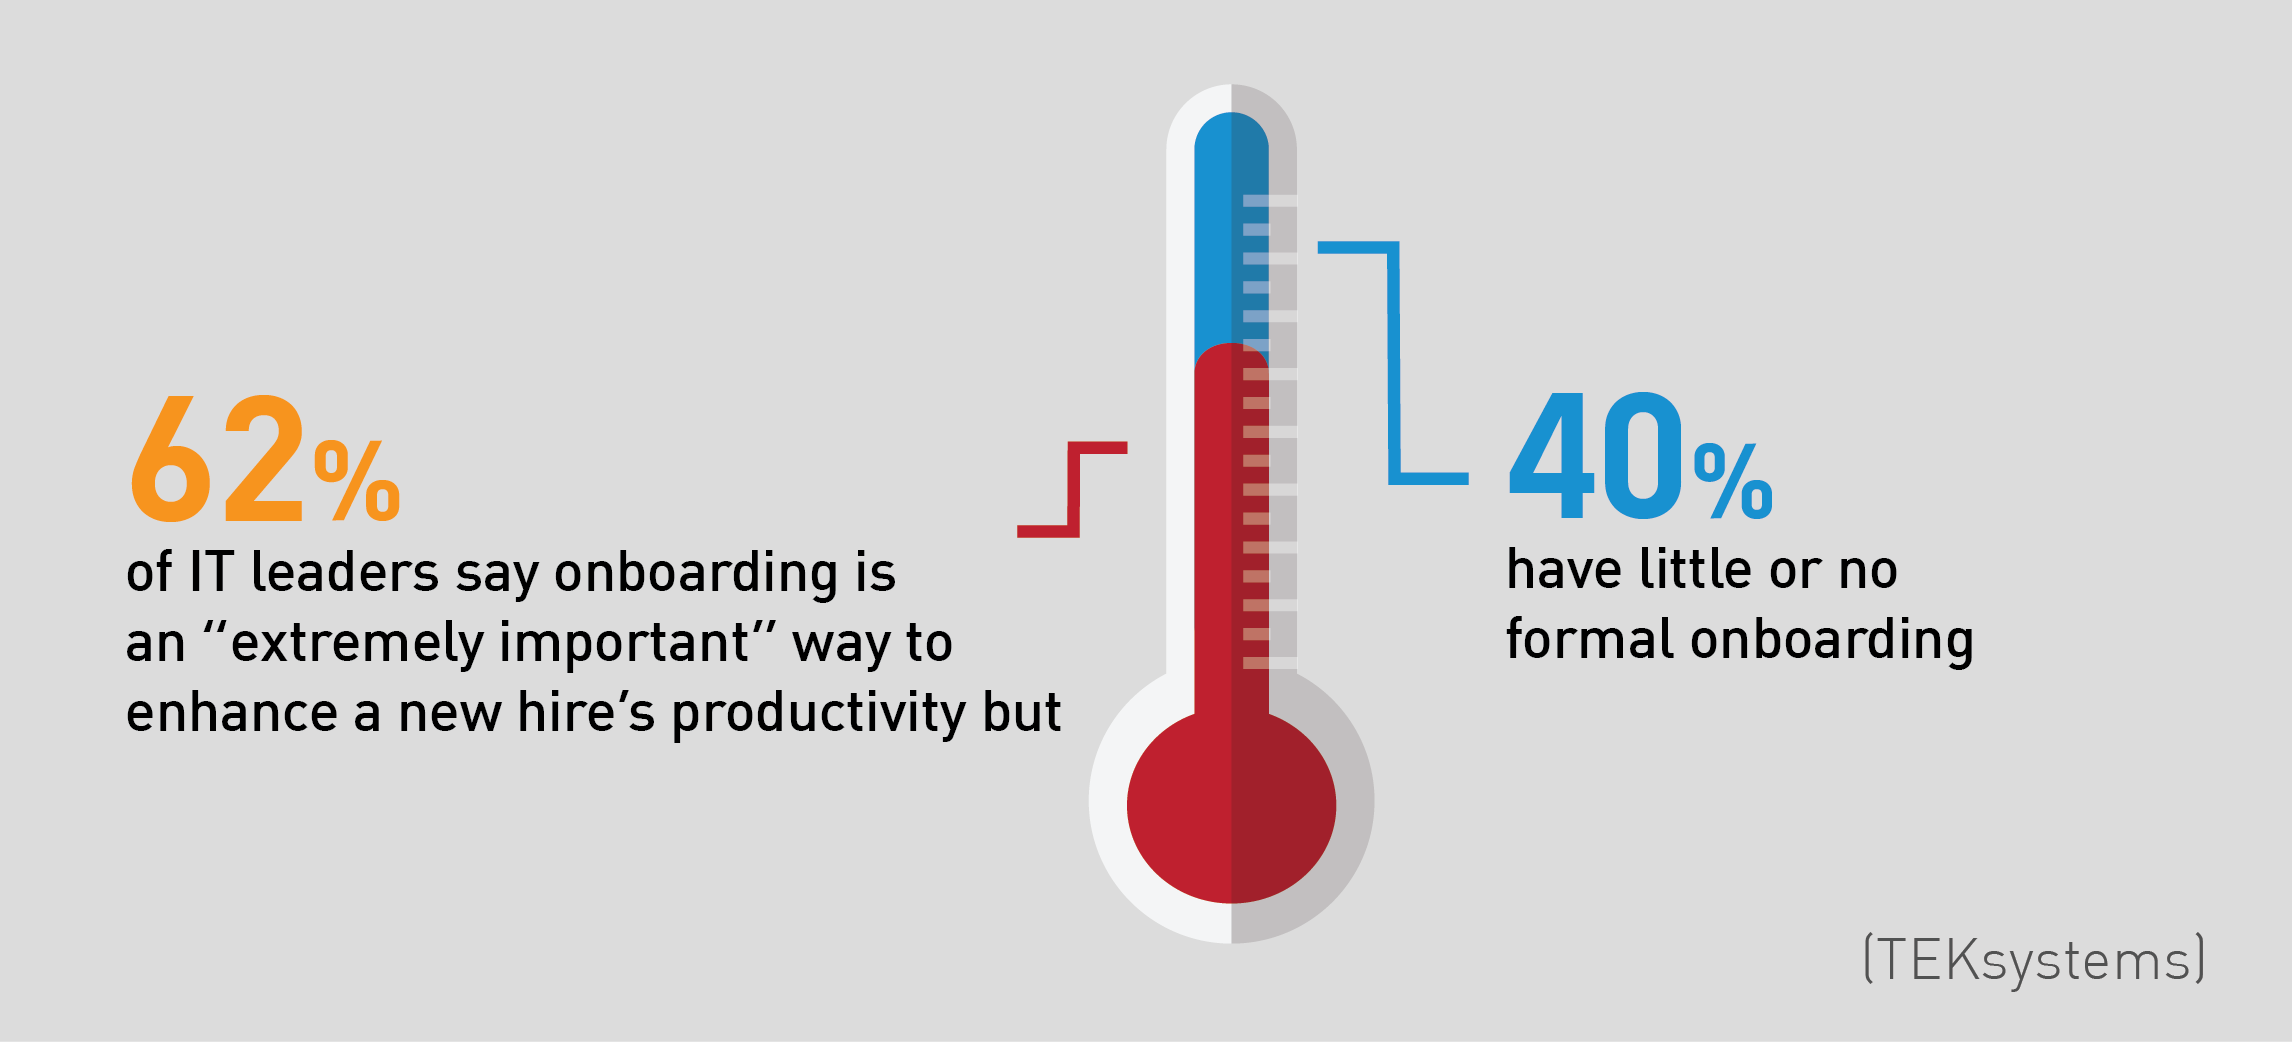 62% of IT leaders say onboarding is an “extremely important” way to drive new-hire productivity